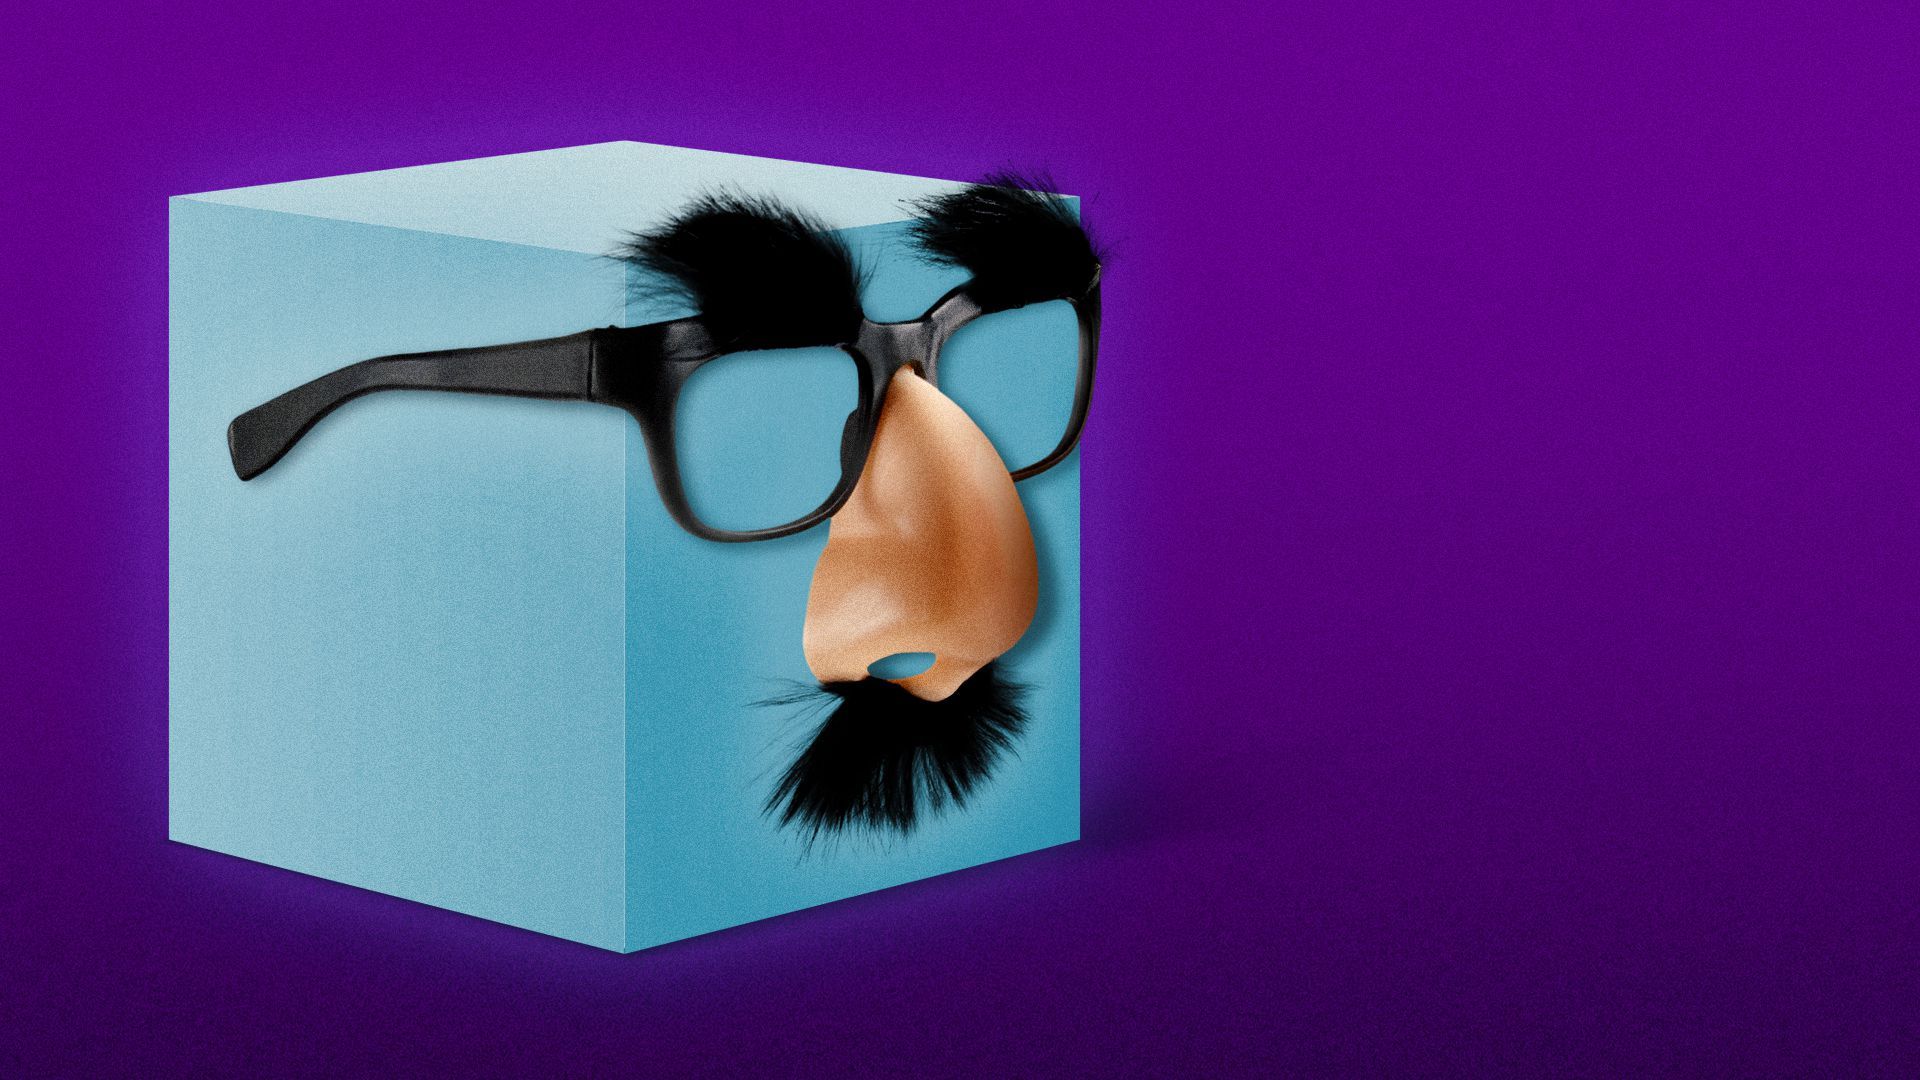 Illustration of a cube wearing a pair of comedy disguise glasses.